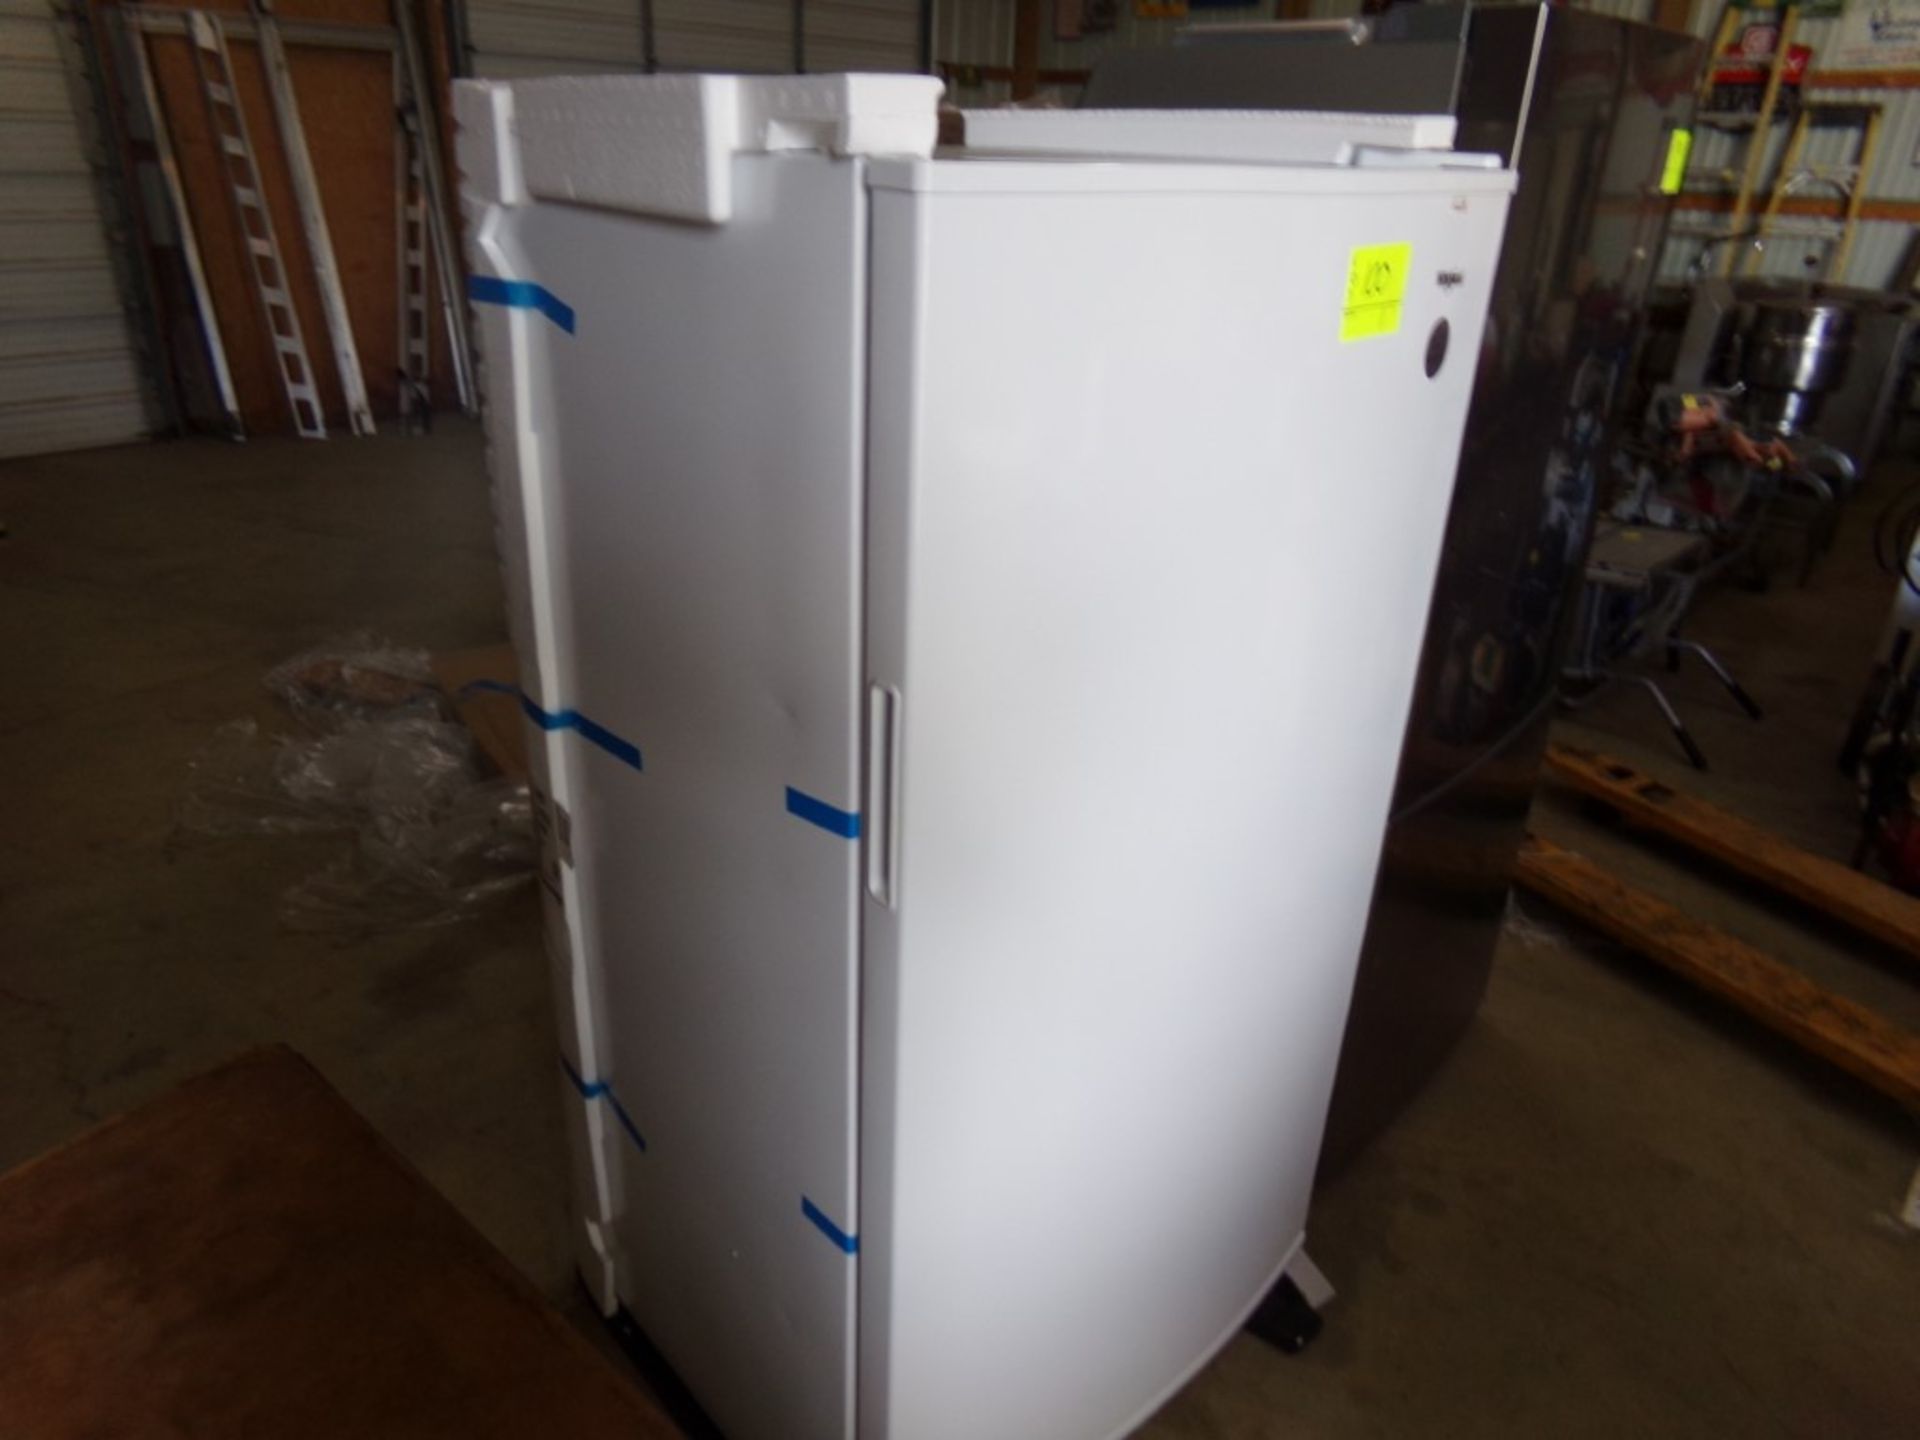 Whirlpool Upright Freezer Model WZF34X15DW09. New Scratch and Dent, SOLD AS IS